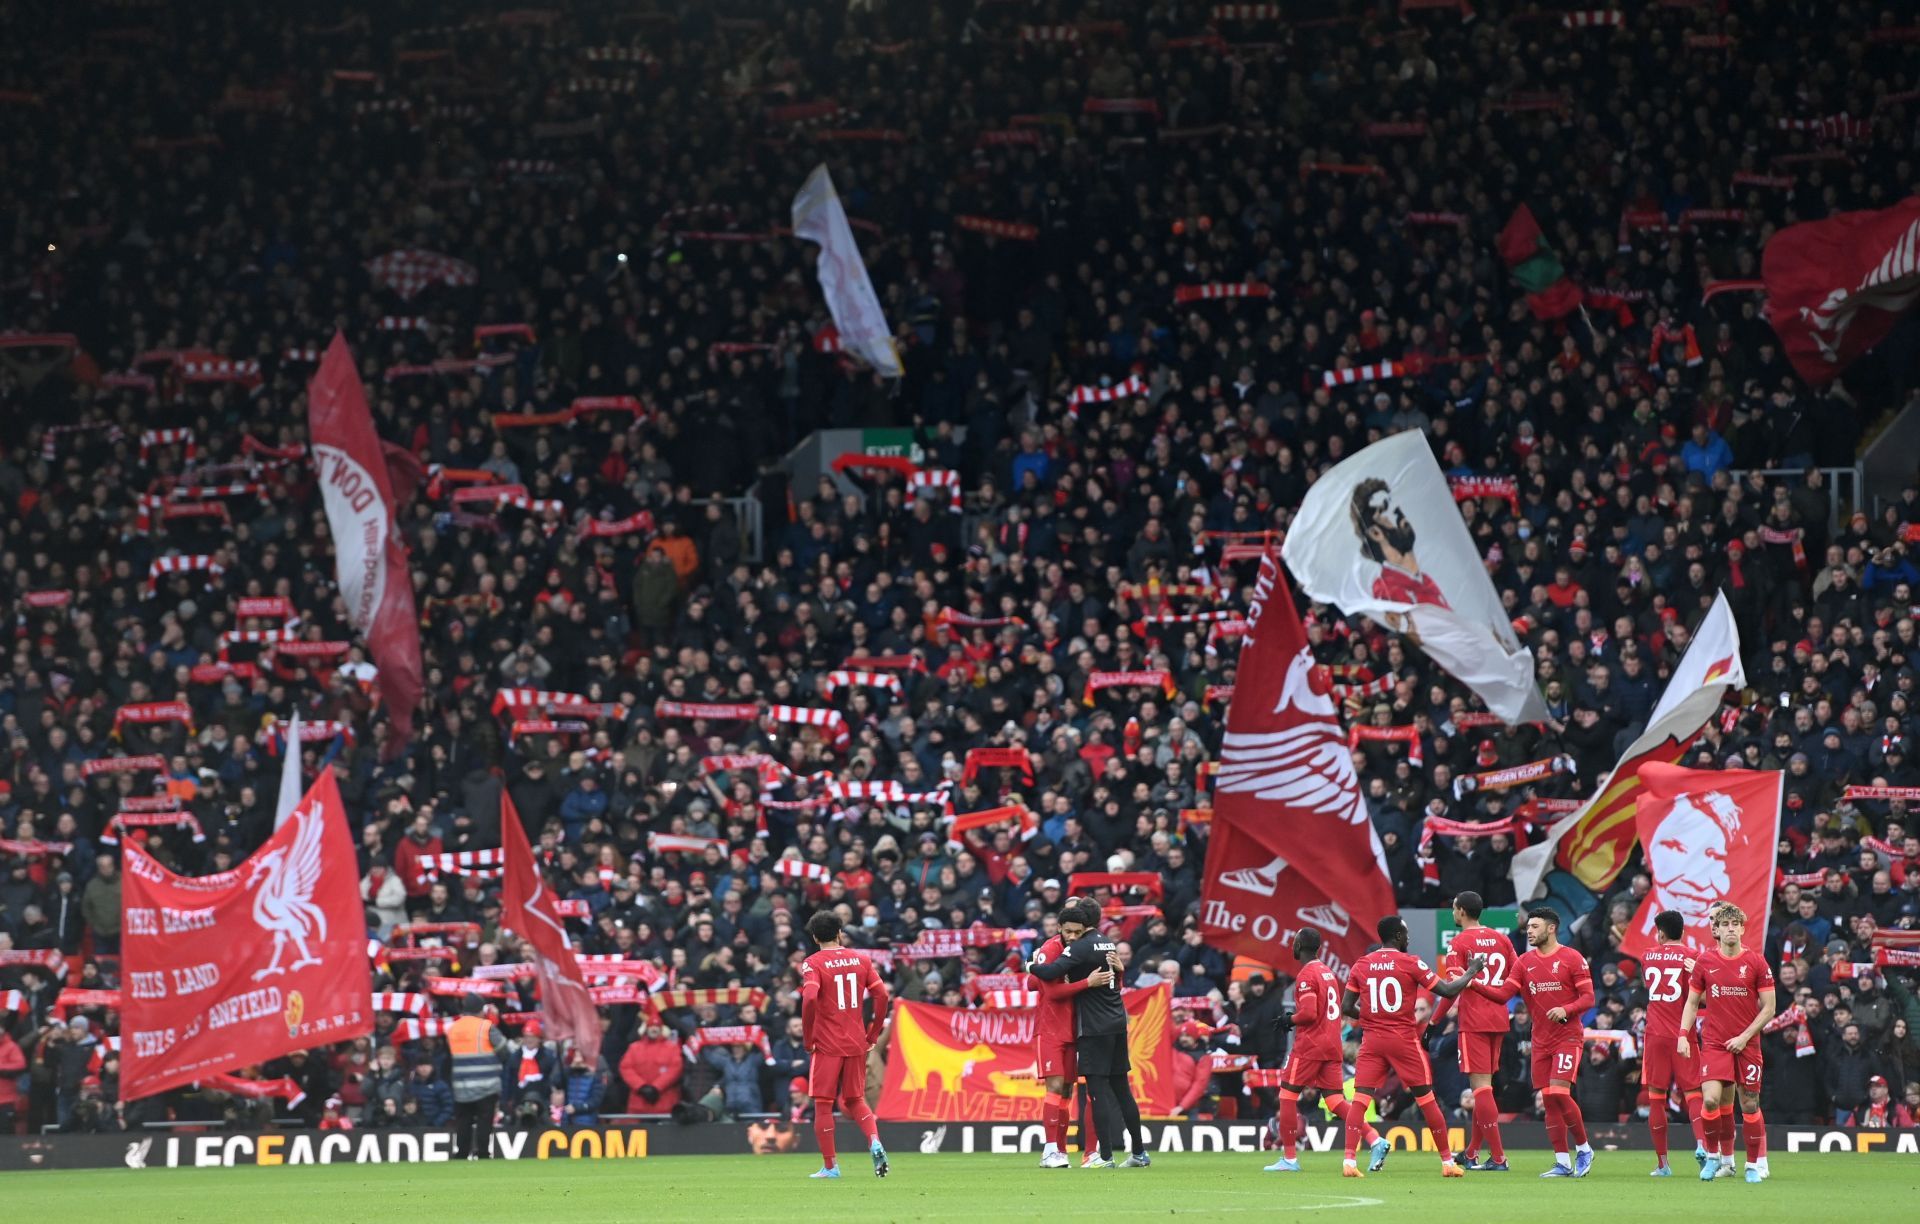 Liverpool supporters in full voice at Anfield